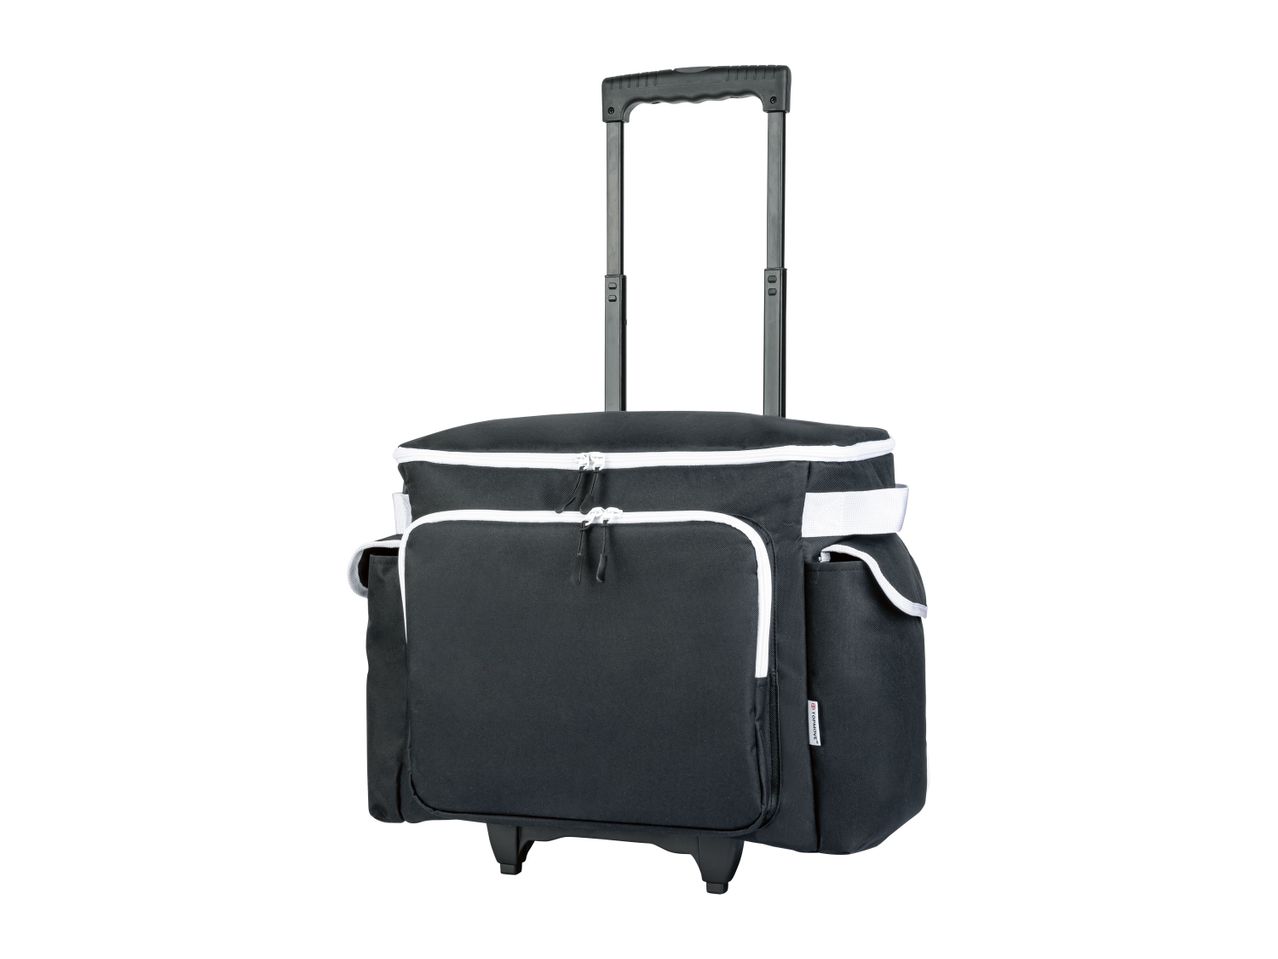 Go to full screen view: Sewing Machine Trolley Bag - Image 1